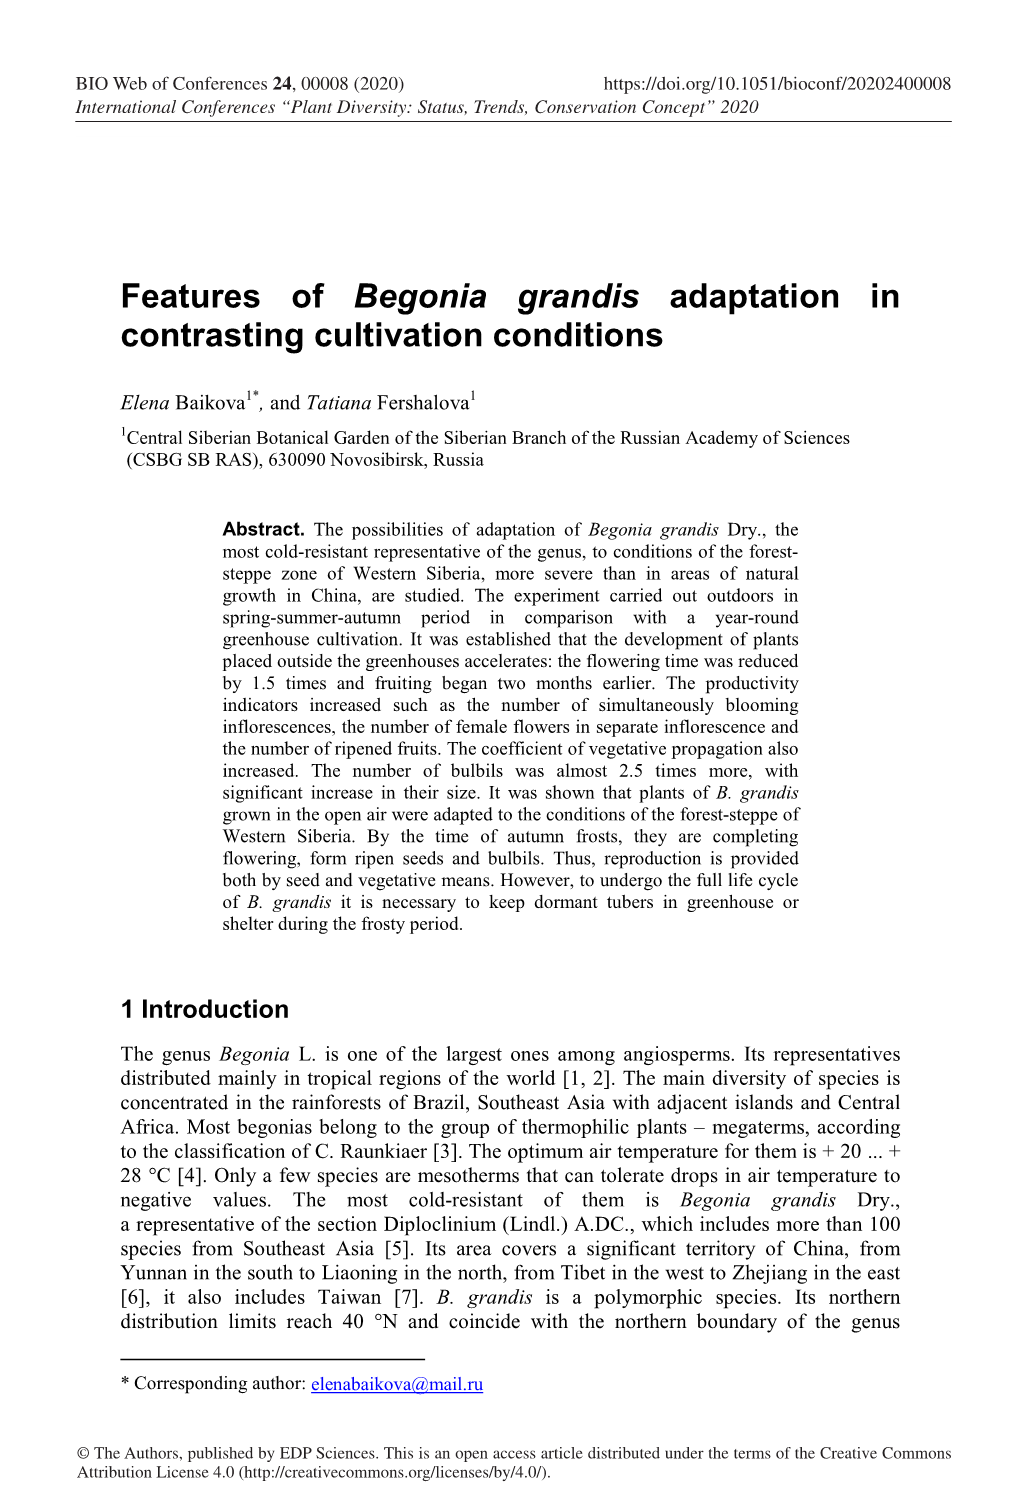 Features of Begonia Grandis Adaptation in Contrasting Cultivation Conditions